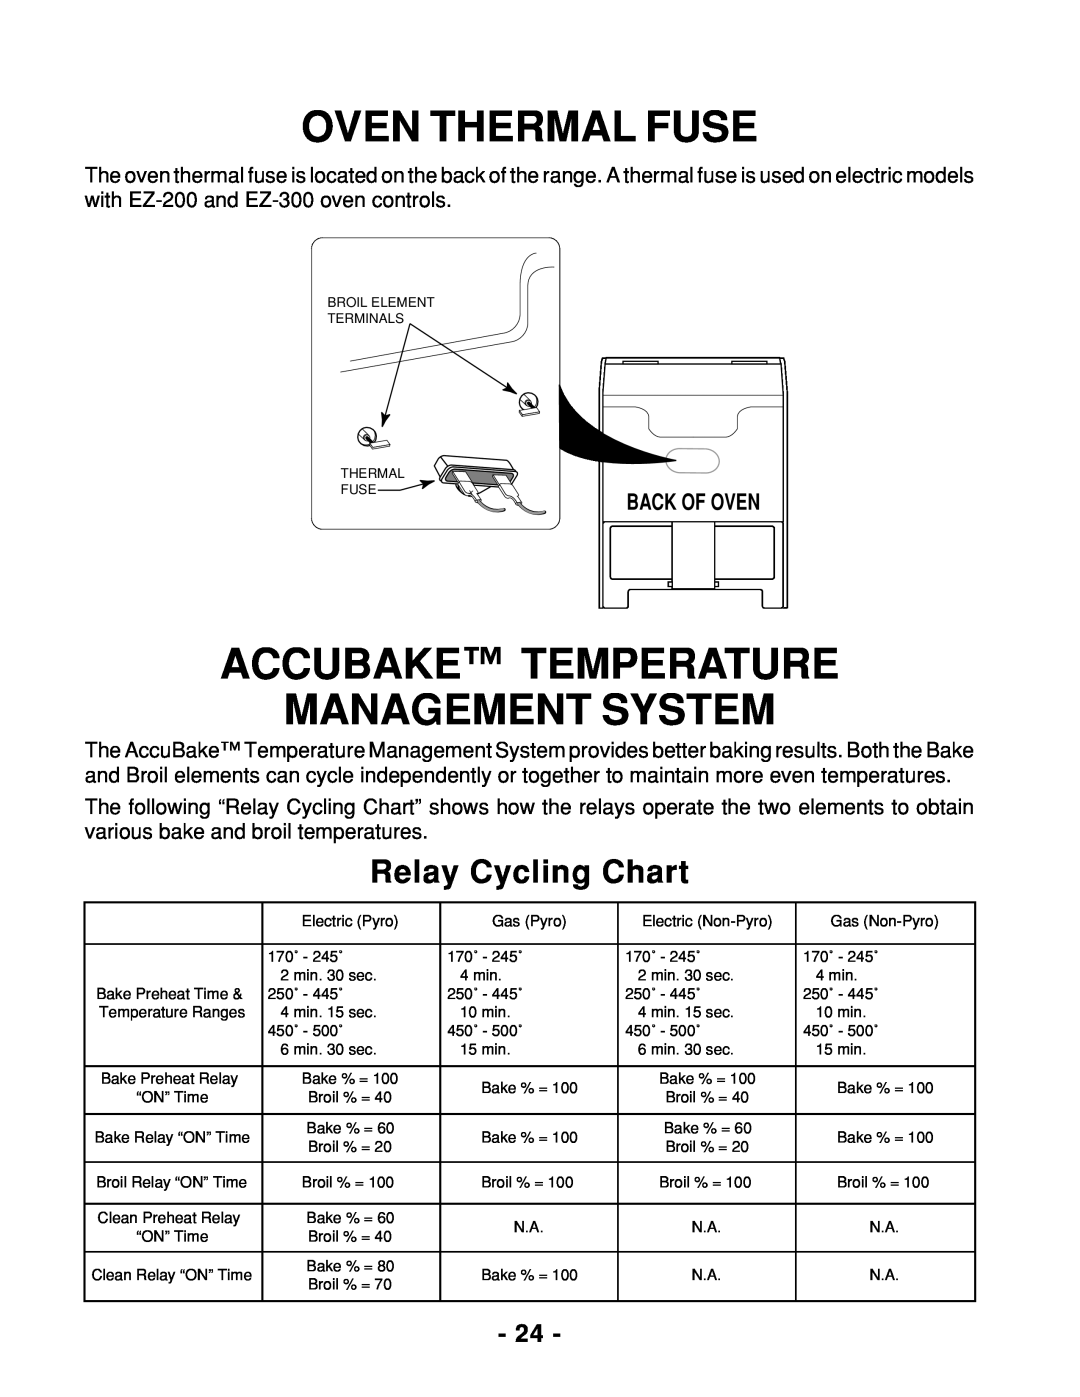 Whirlpool 465 manual Oven Thermal Fuse, Accubake Temperature Management System, Relay Cycling Chart, Back Of Oven 